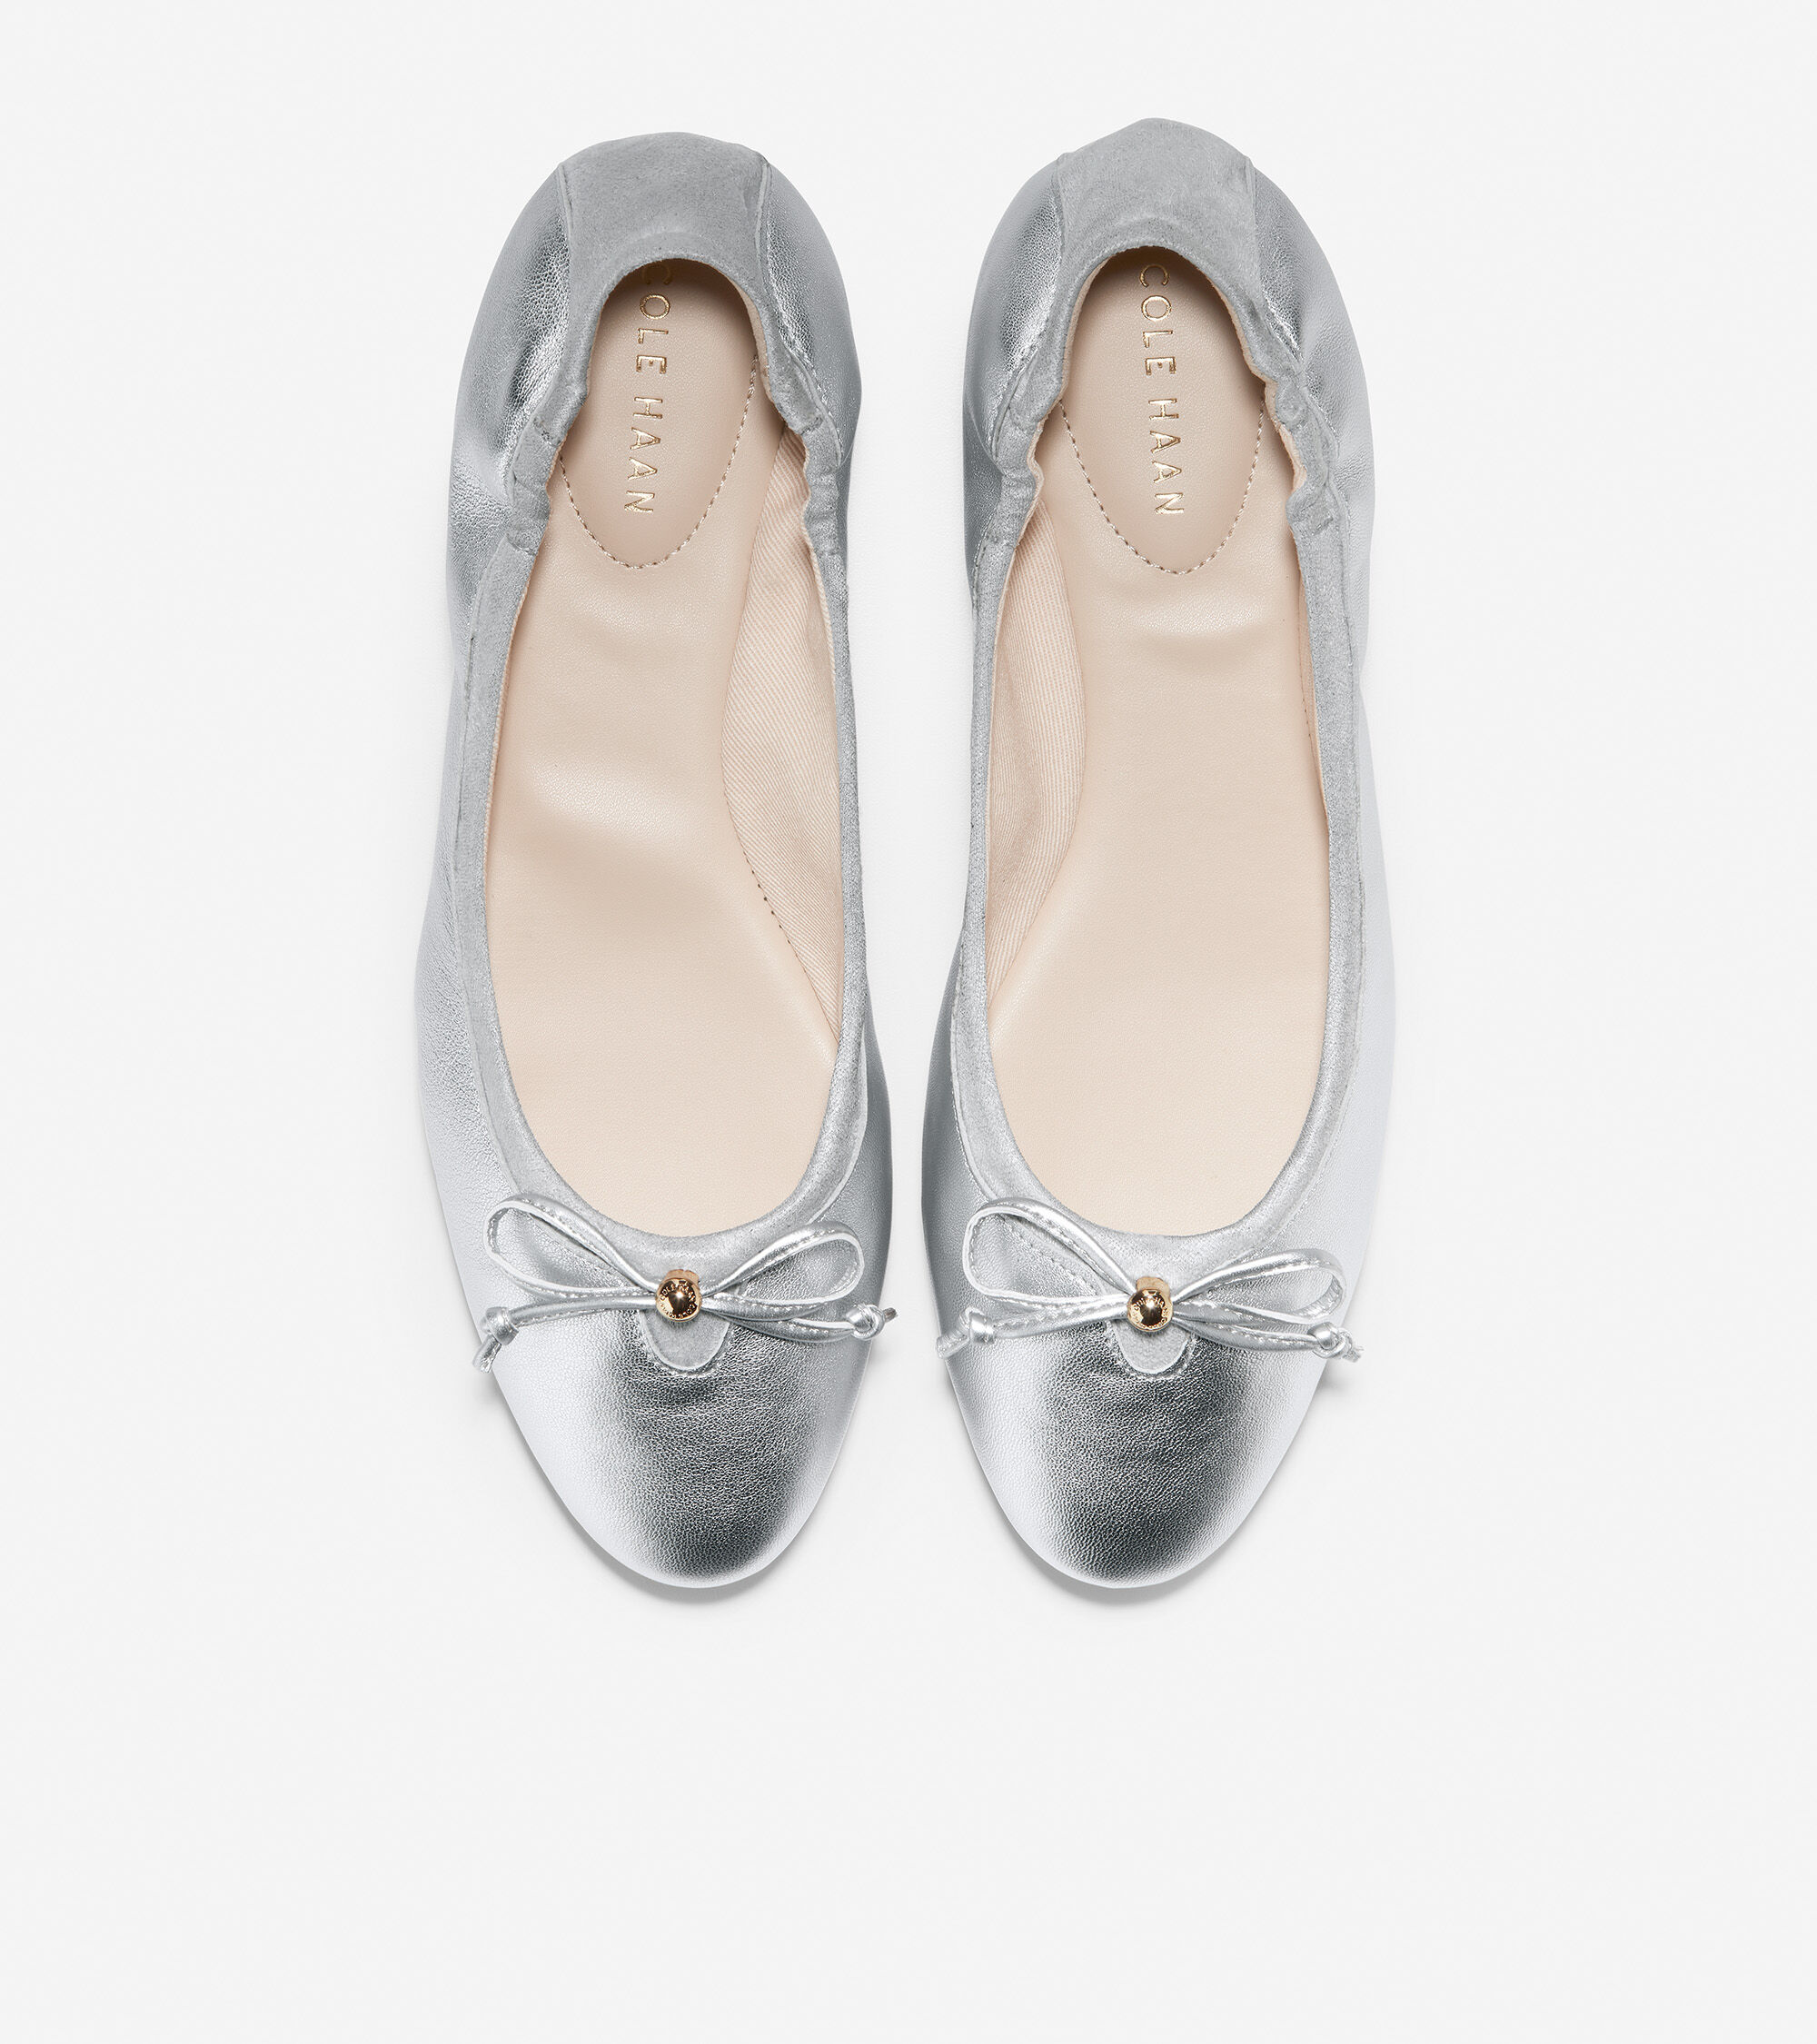 Women's Keira Ballet Flat in Soft Silver Leather | Cole Haan